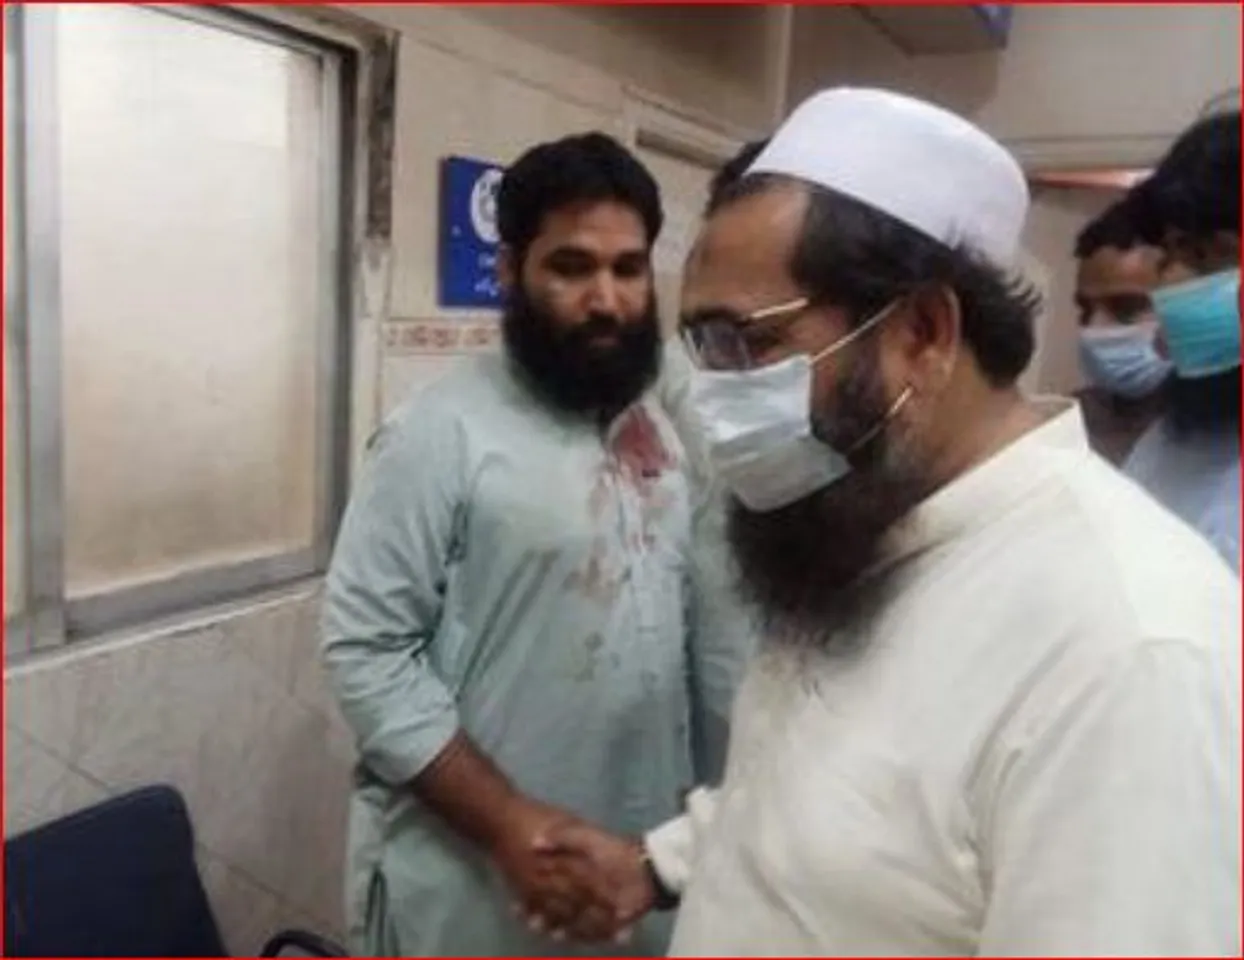 LeT terrorists freely roaming in Lahore, goes to visit injured in hospital